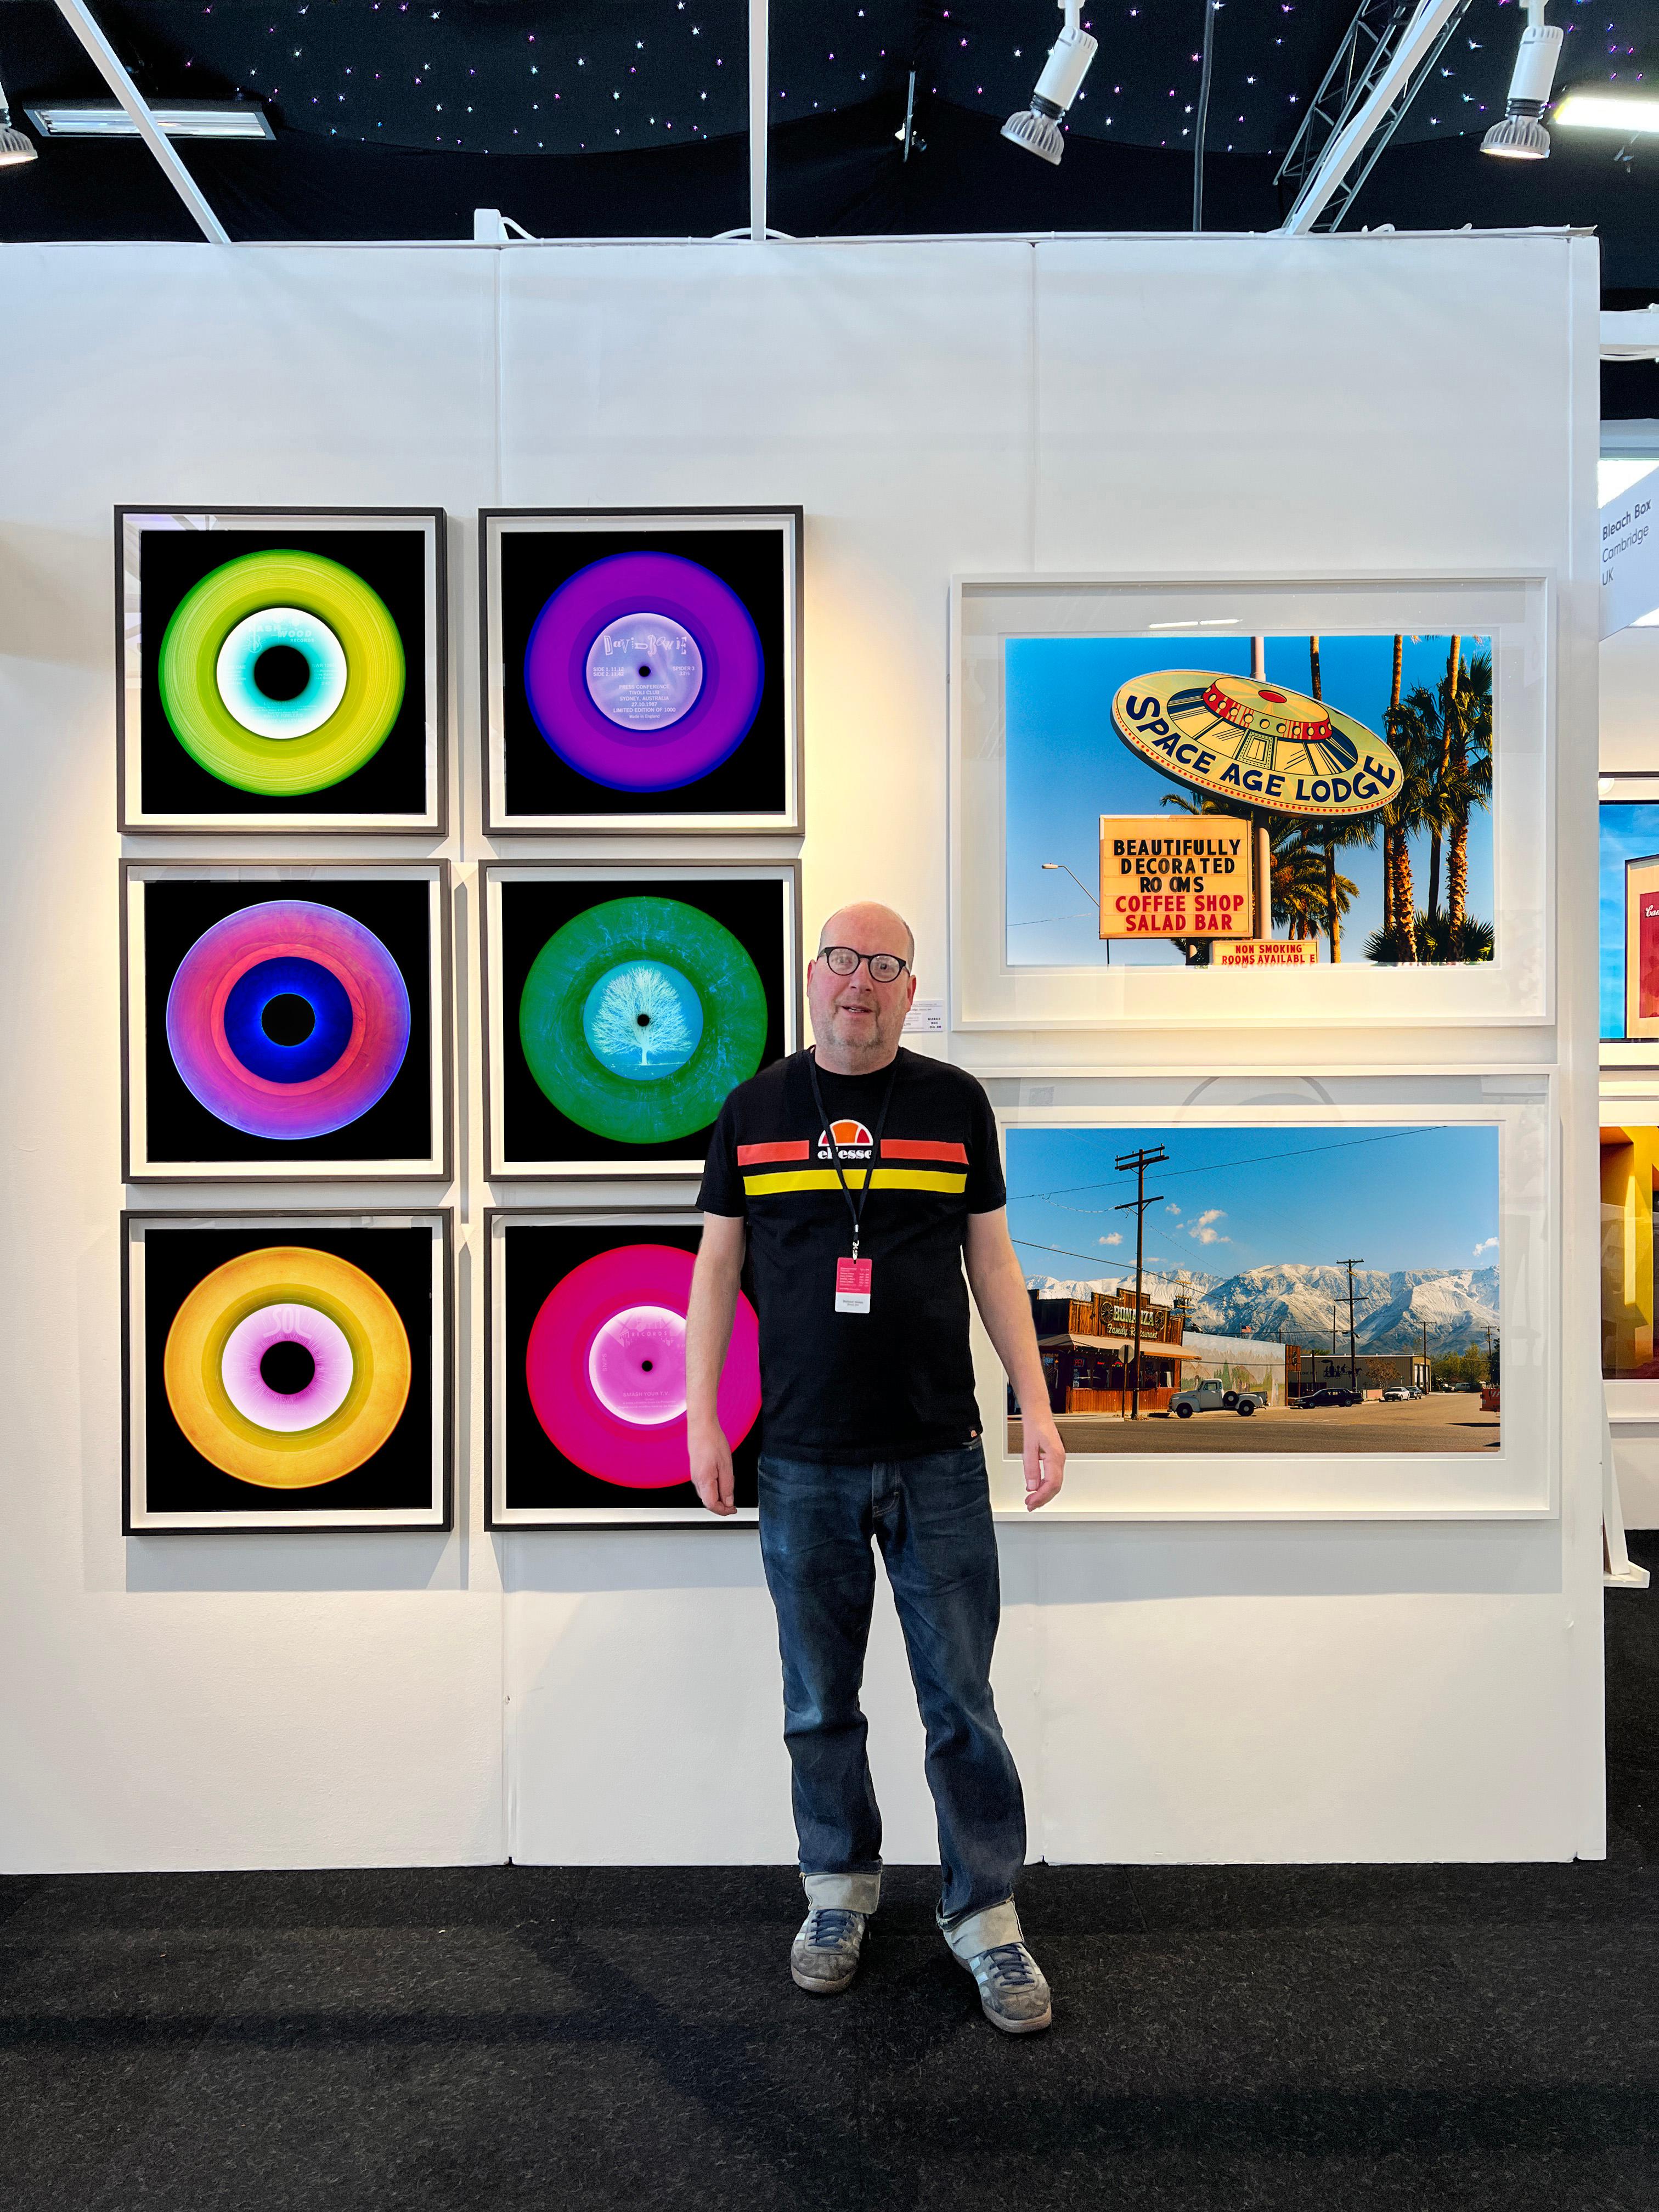 All Rights Reserved (Psychedelic Ombre), from the Heidler & Heeps Vinyl Collection.

Acclaimed contemporary photographers, Richard Heeps and Natasha Heidler have collaborated to make this beautifully mesmerising collection. A celebration of the